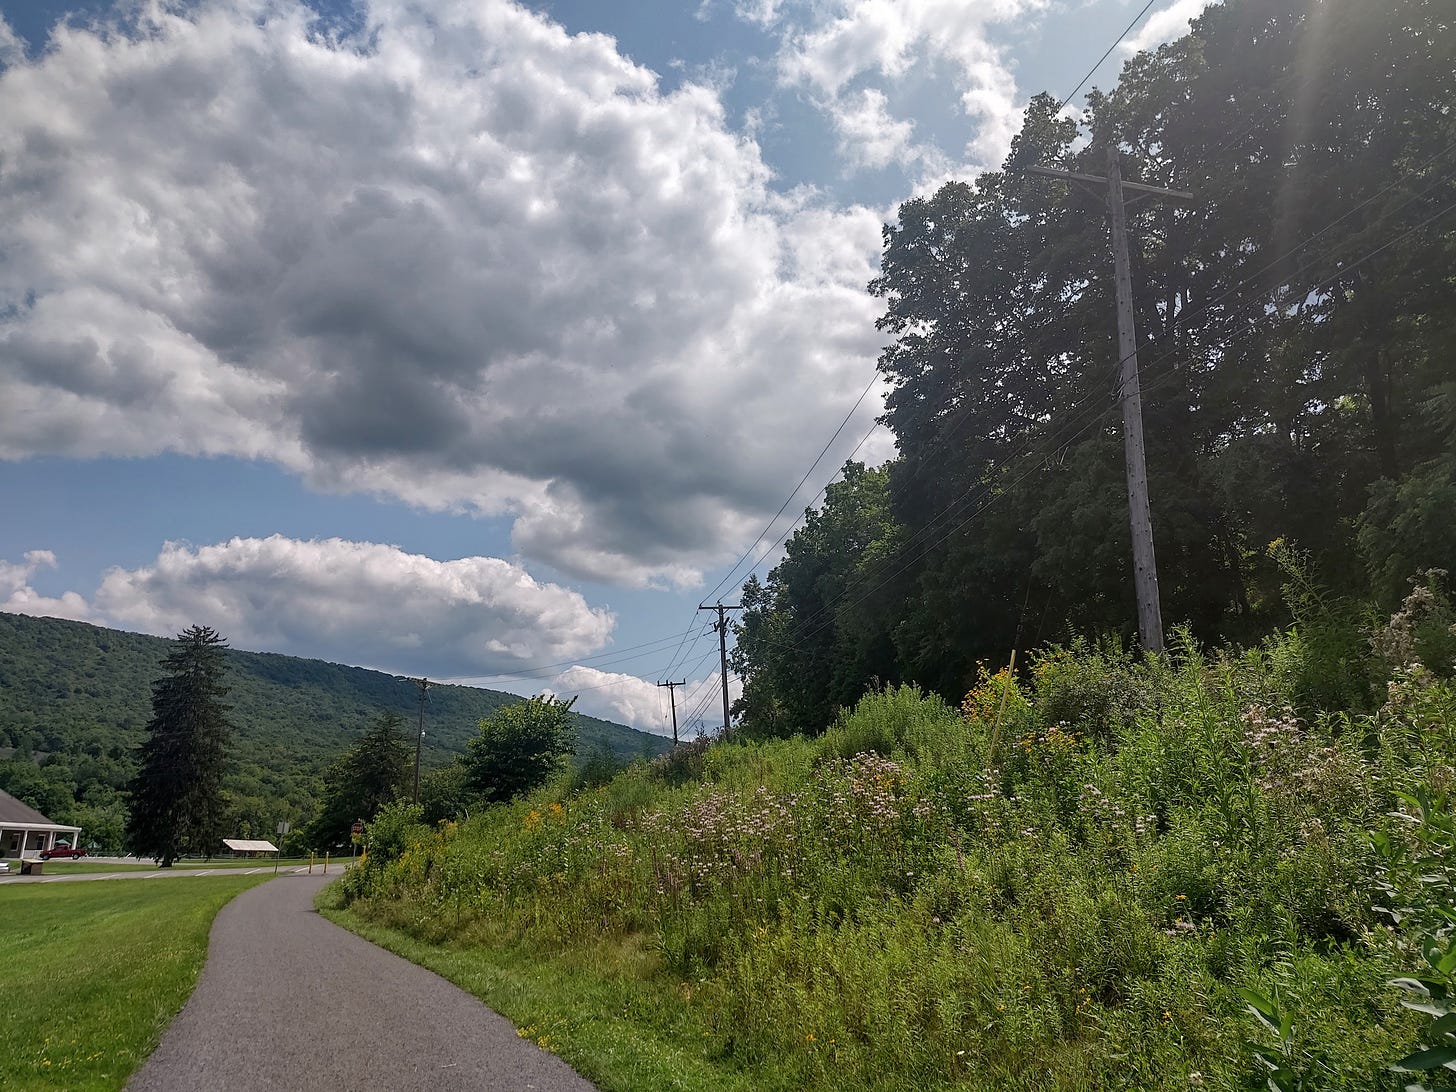 Clouds in a blue sky, a low mountain, a winding asphalt road, and telephone wires stretching around the hill strewn with wildflowers